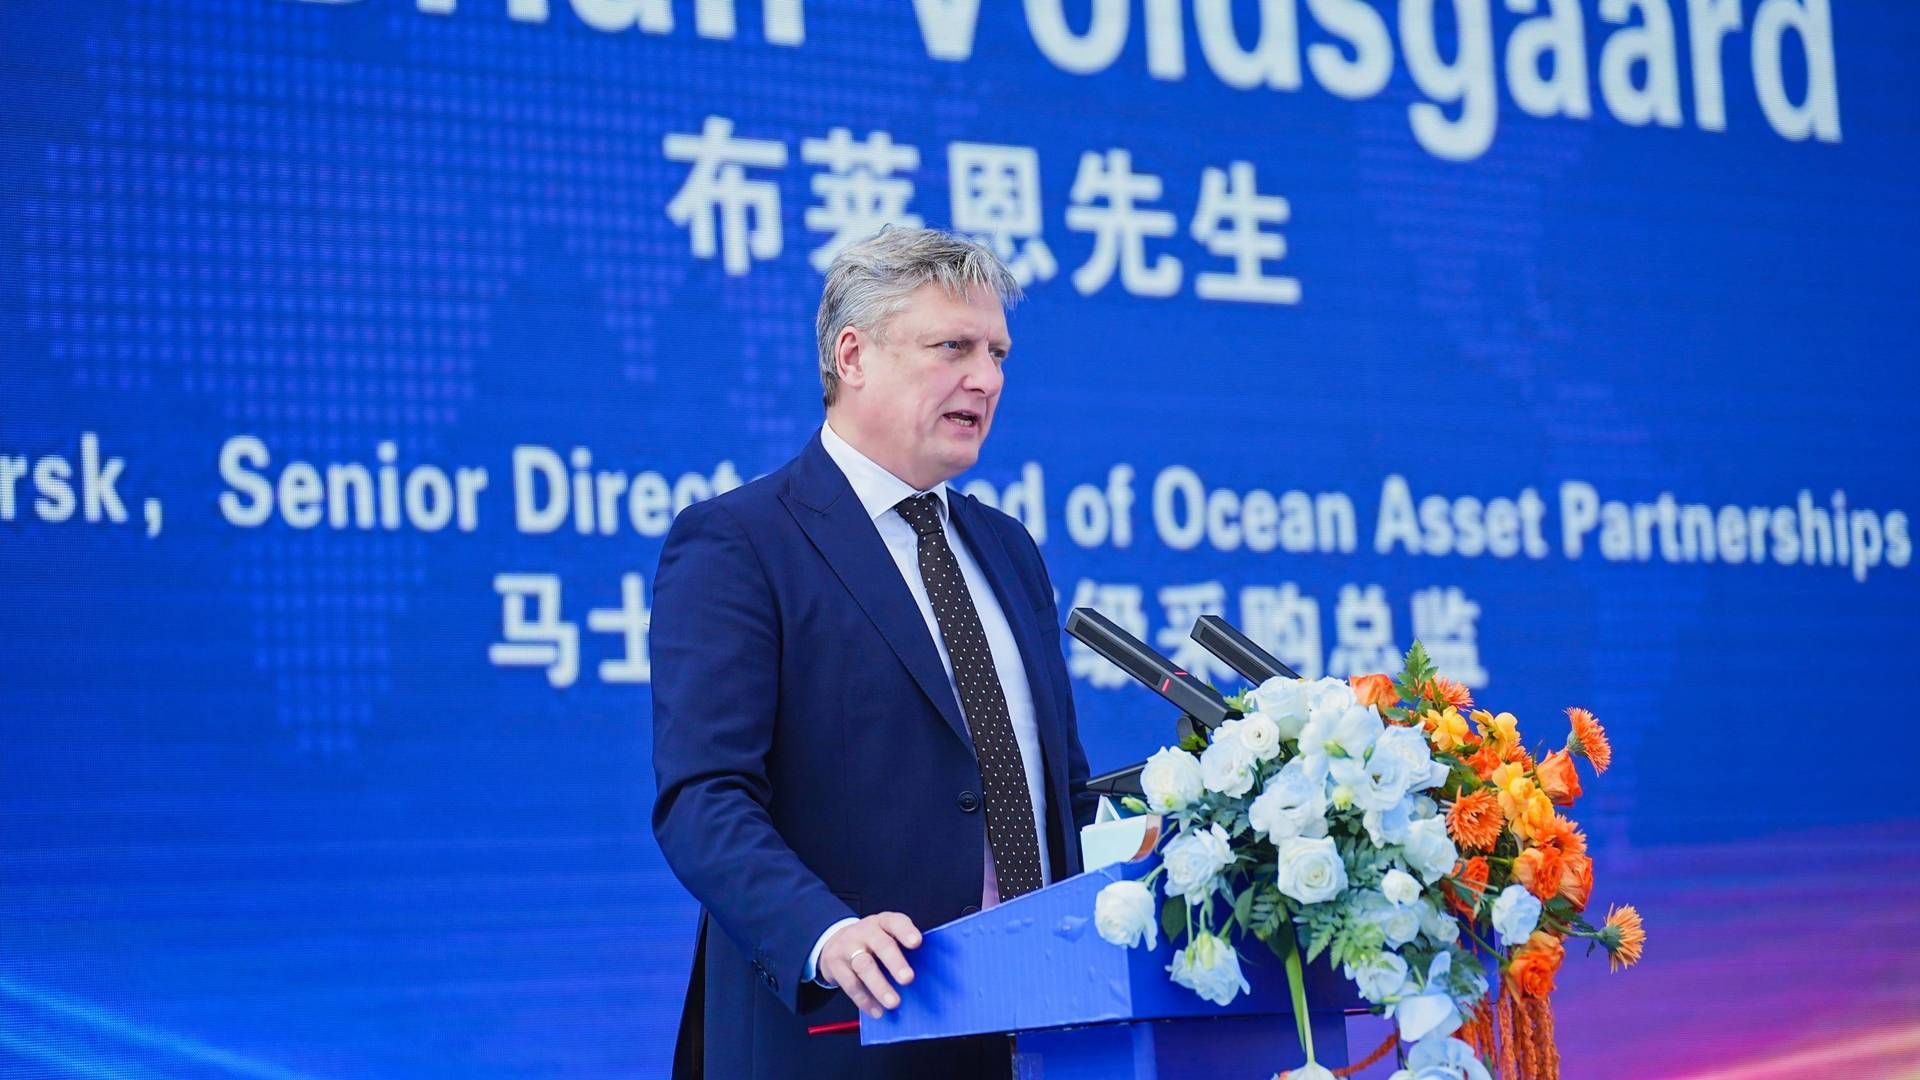 Brian Voldsgaard, the Maersk Group's procurement director, attended the ceremony in Shanghai where the agreement was officially signed. | Photo: Zhoushan Xinya maersk